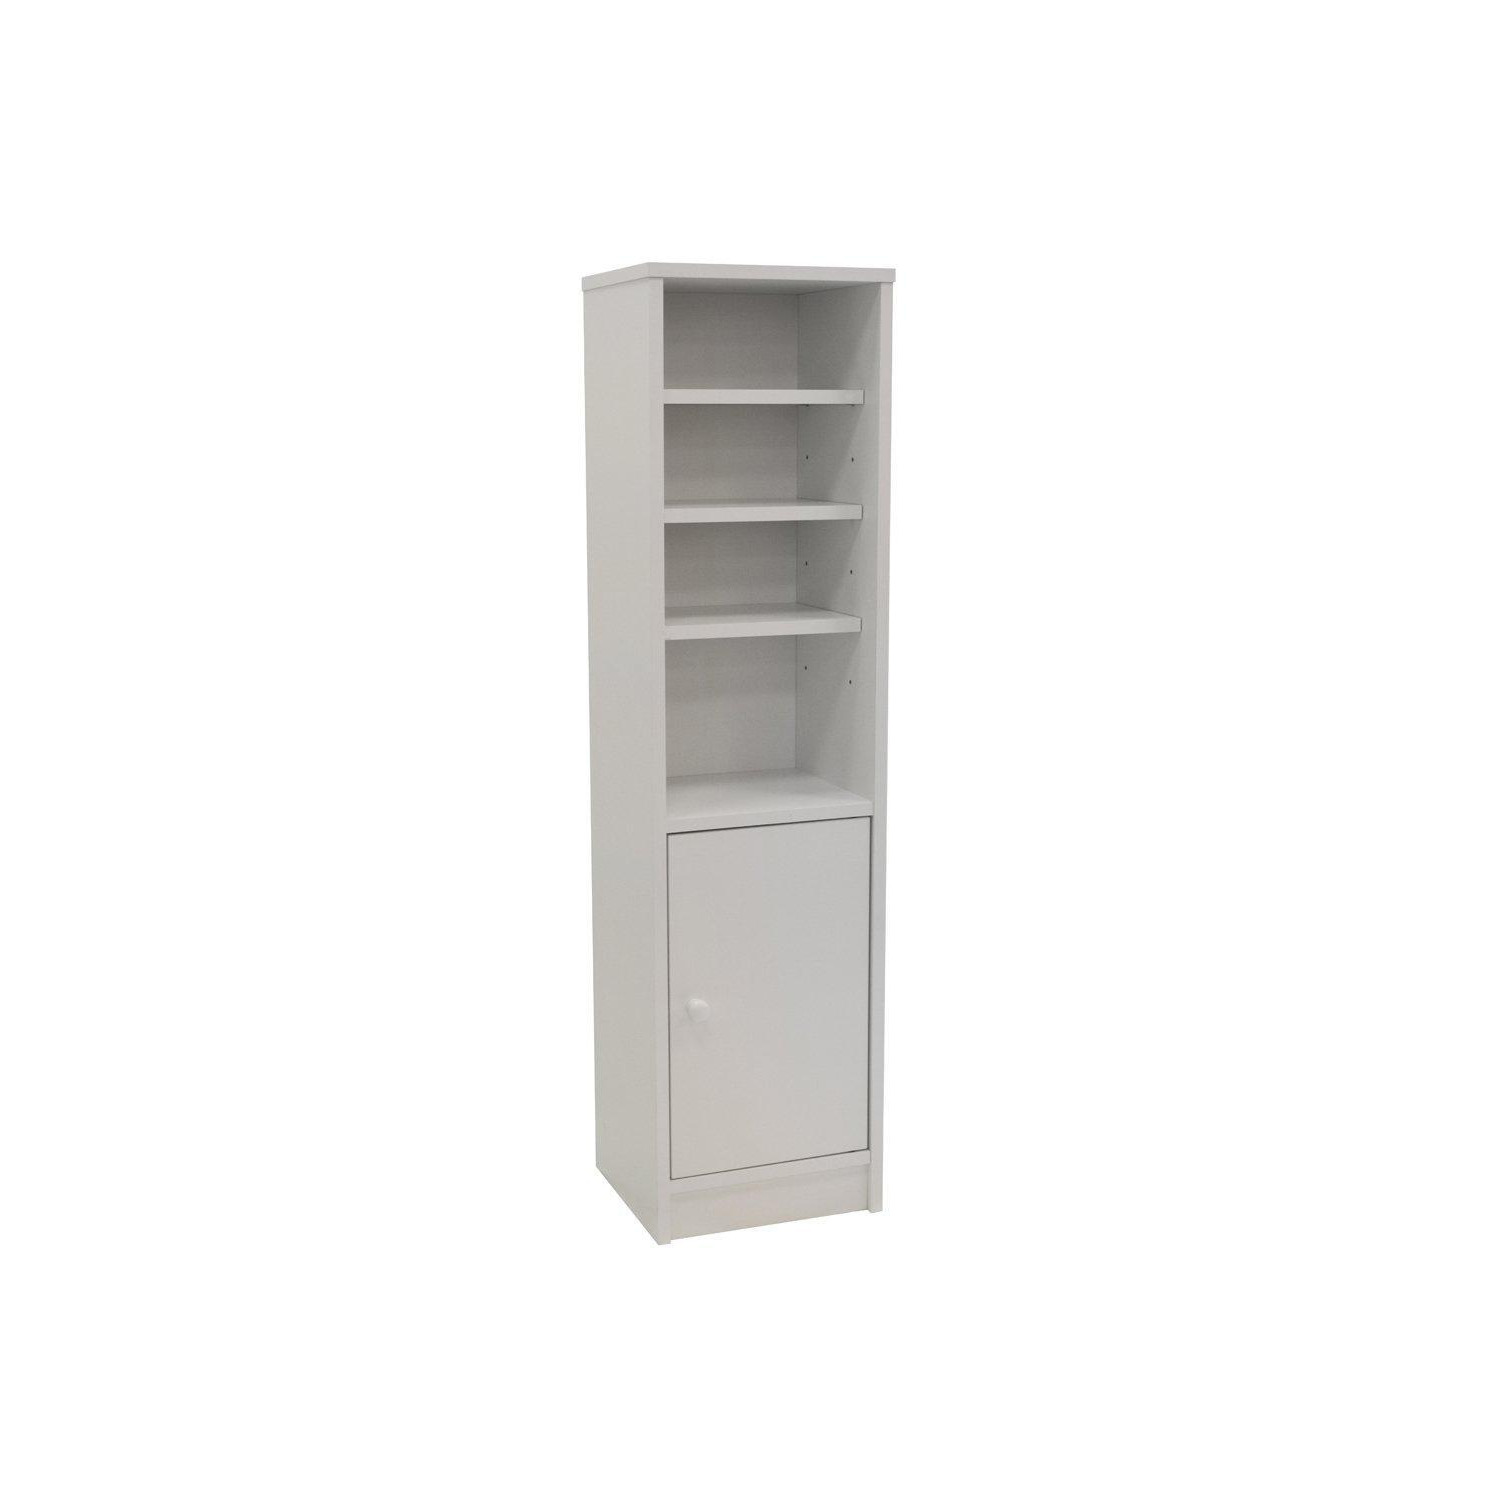 'Jamerson'  Compact Storage Cupboard / Bathroom Cabinet With Shelves  White - image 1